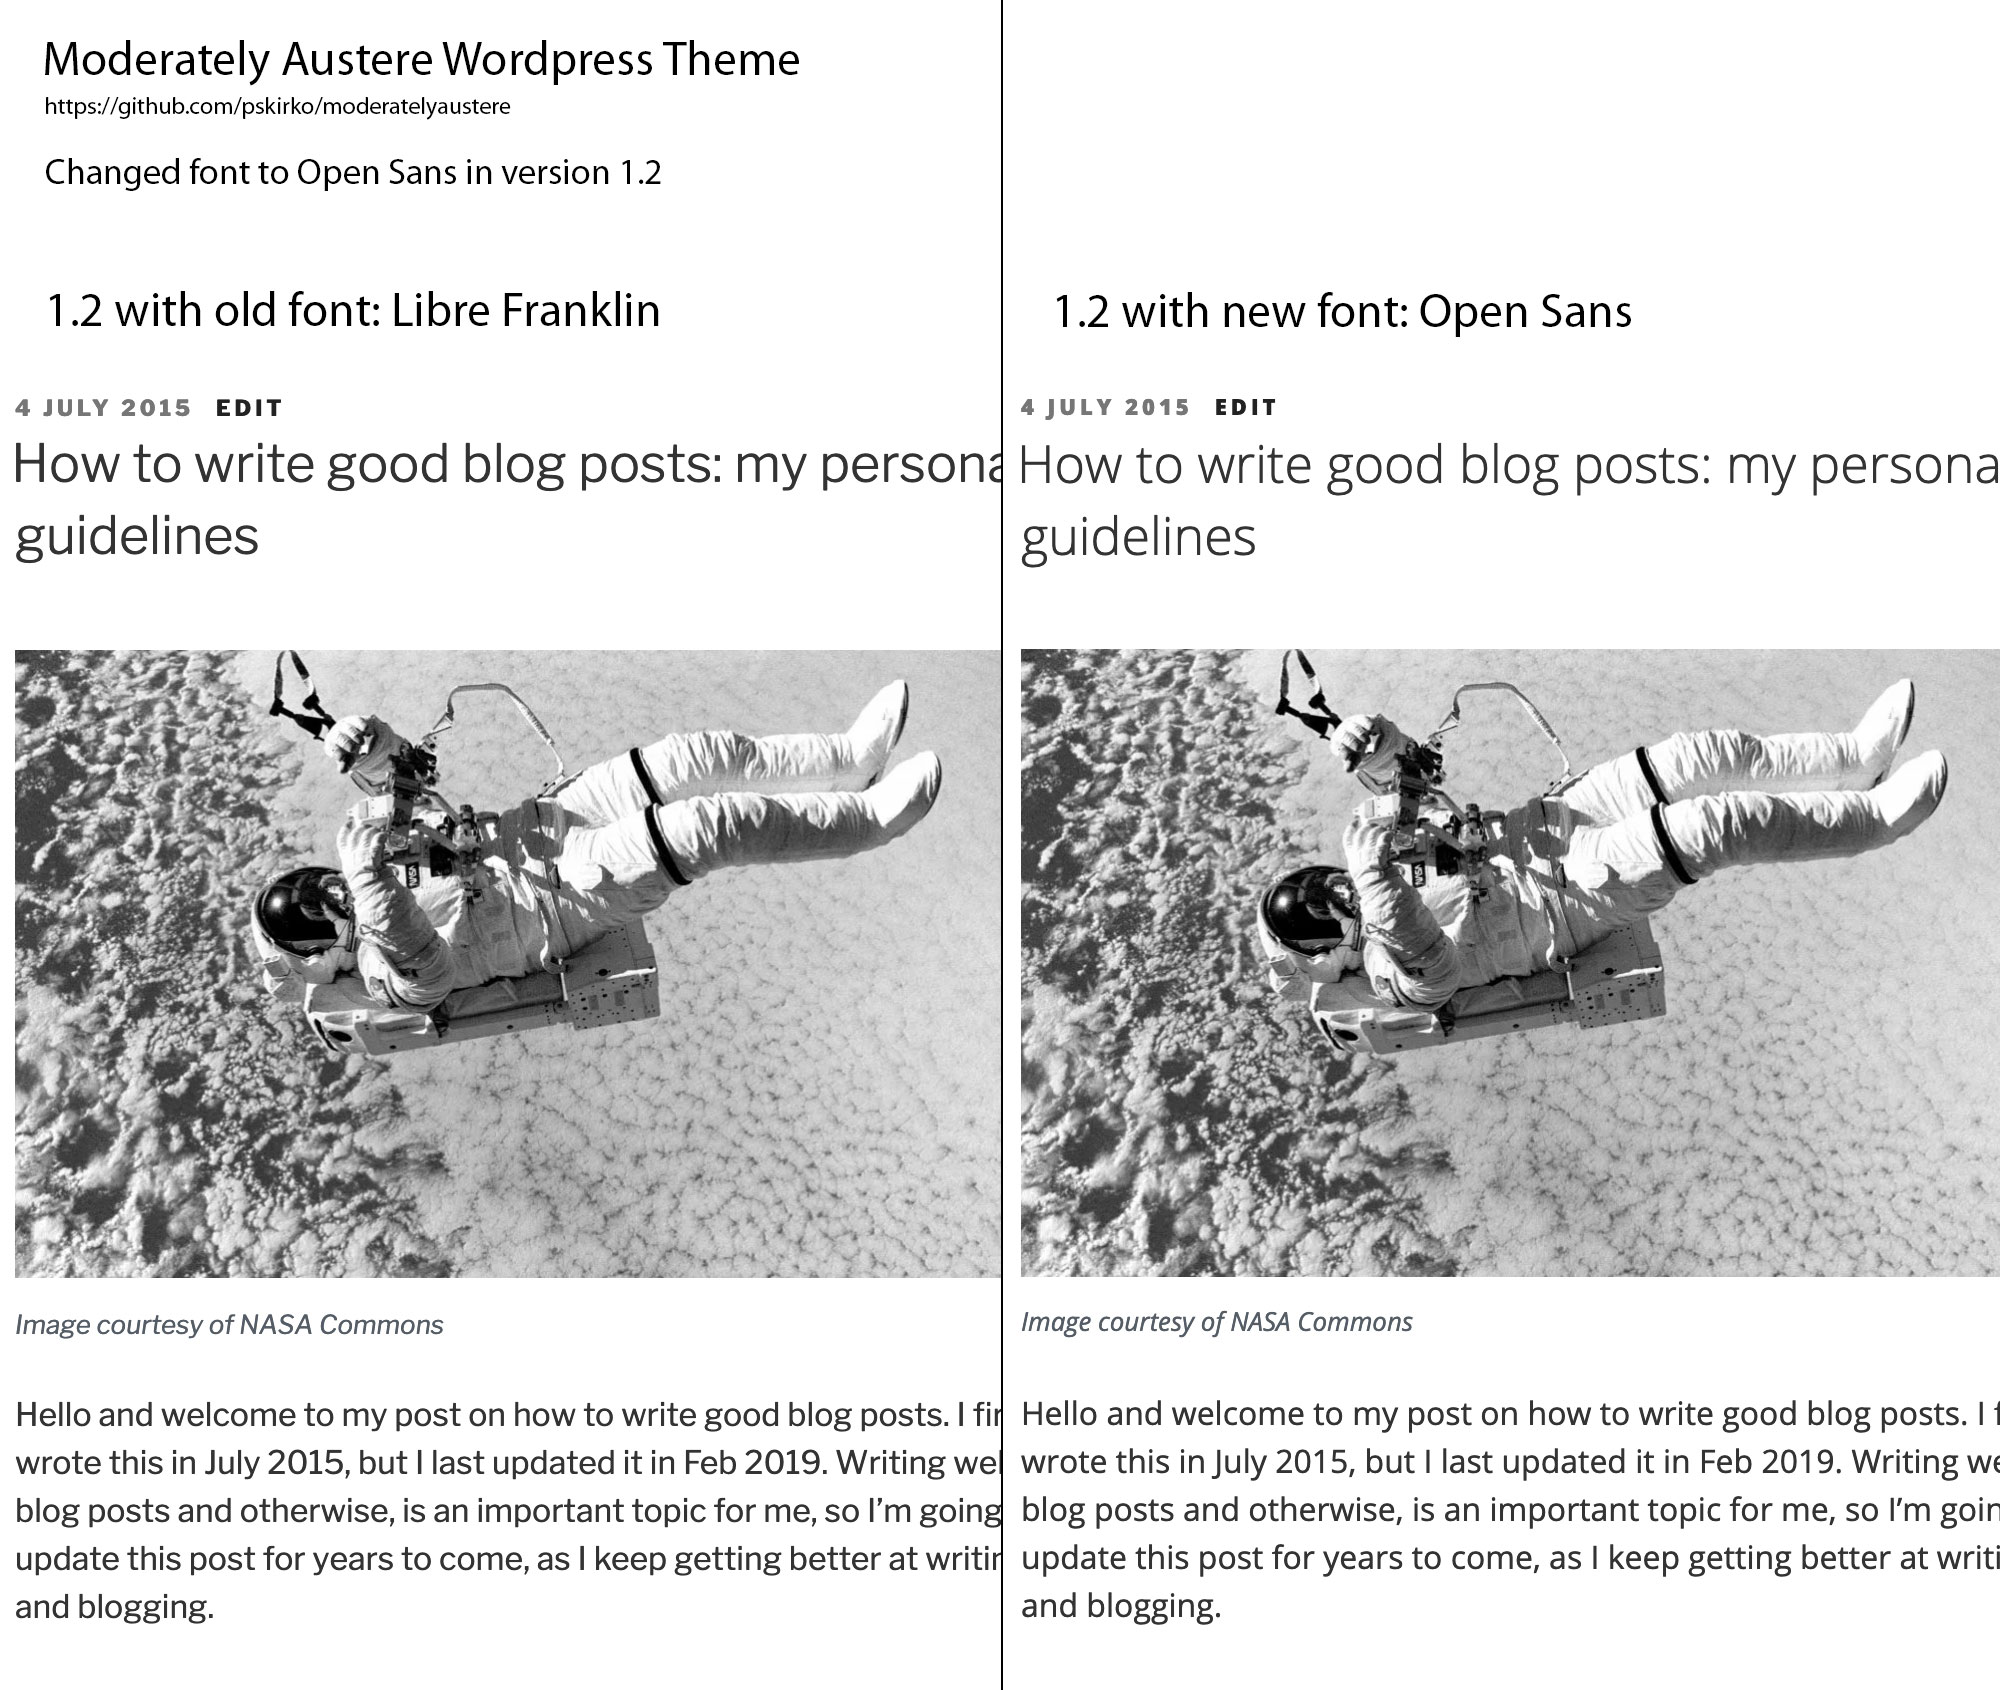 Version 1.2 of Moderately Austere, a personal blog WordPress theme, has been released